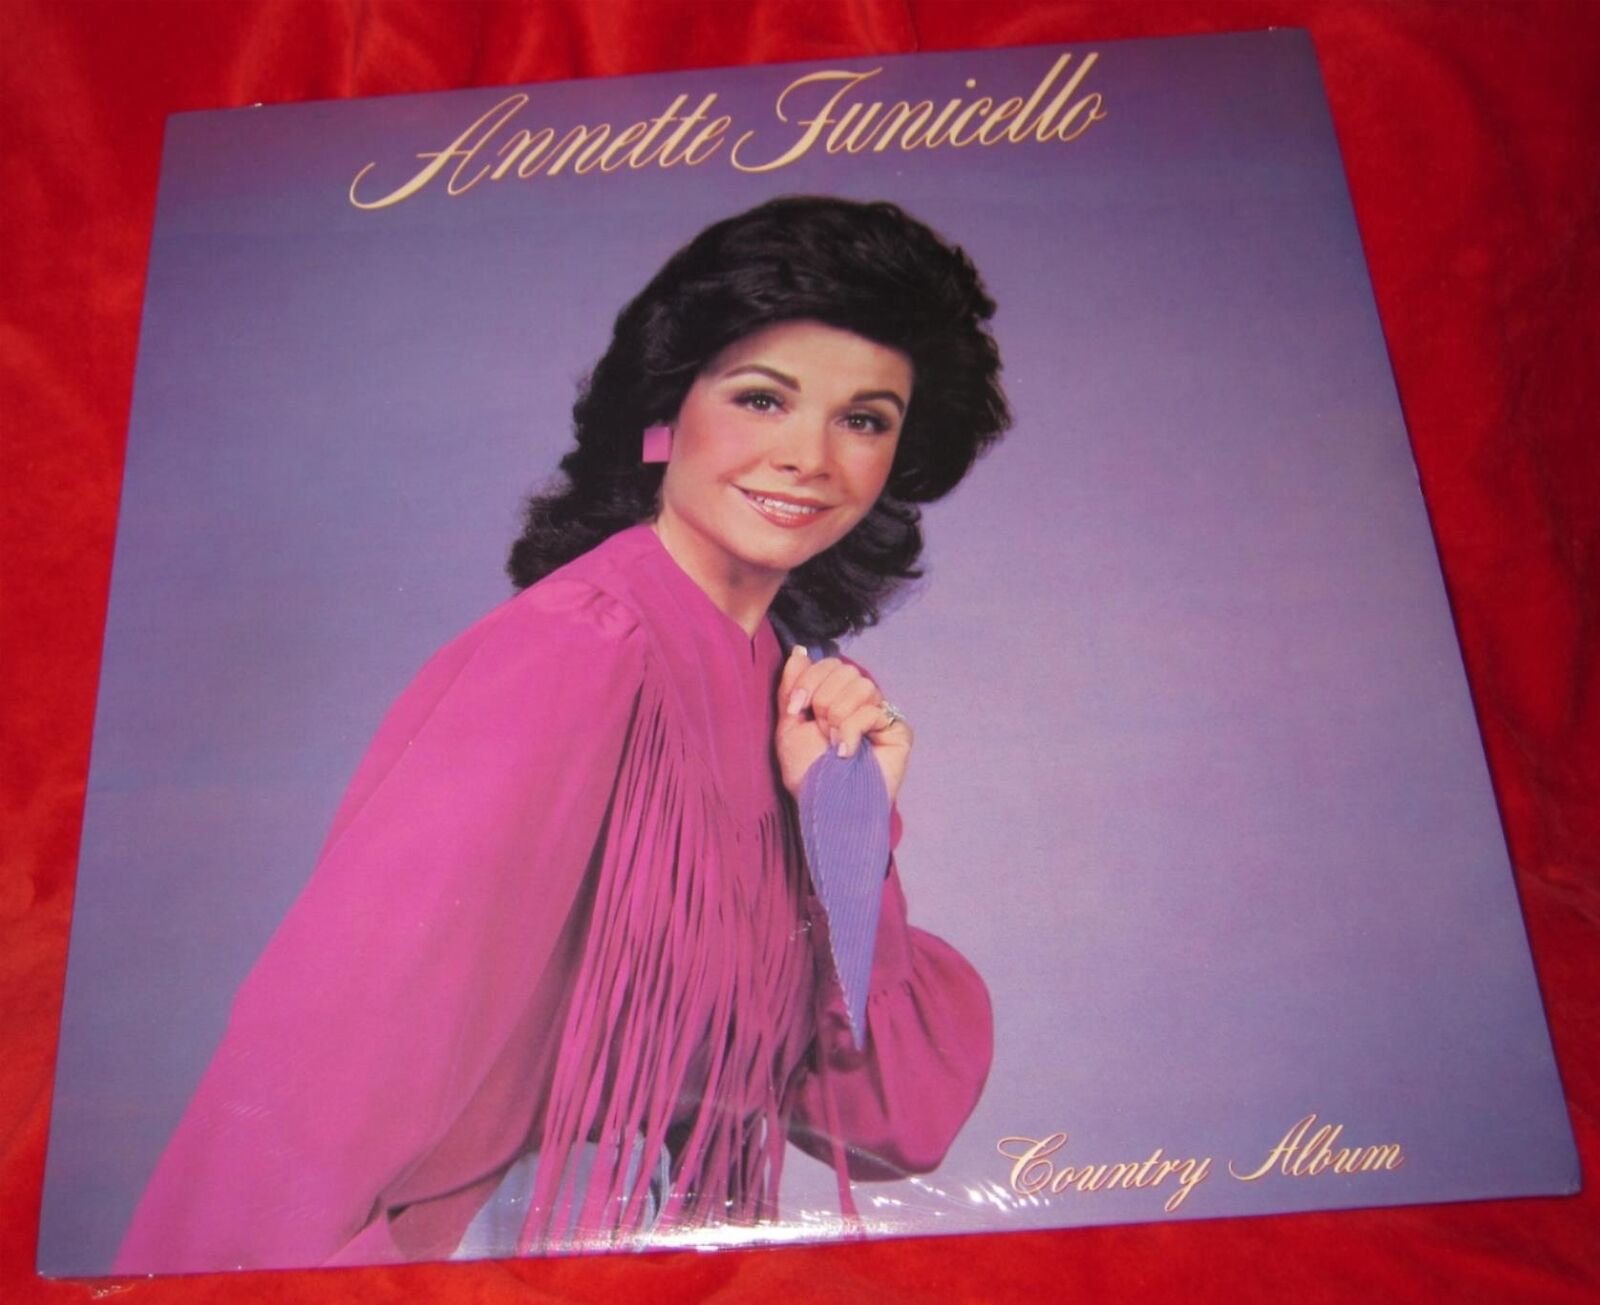 Personal Property of Annette Funicello 1984 Country Album Mint Vinyl LP Record